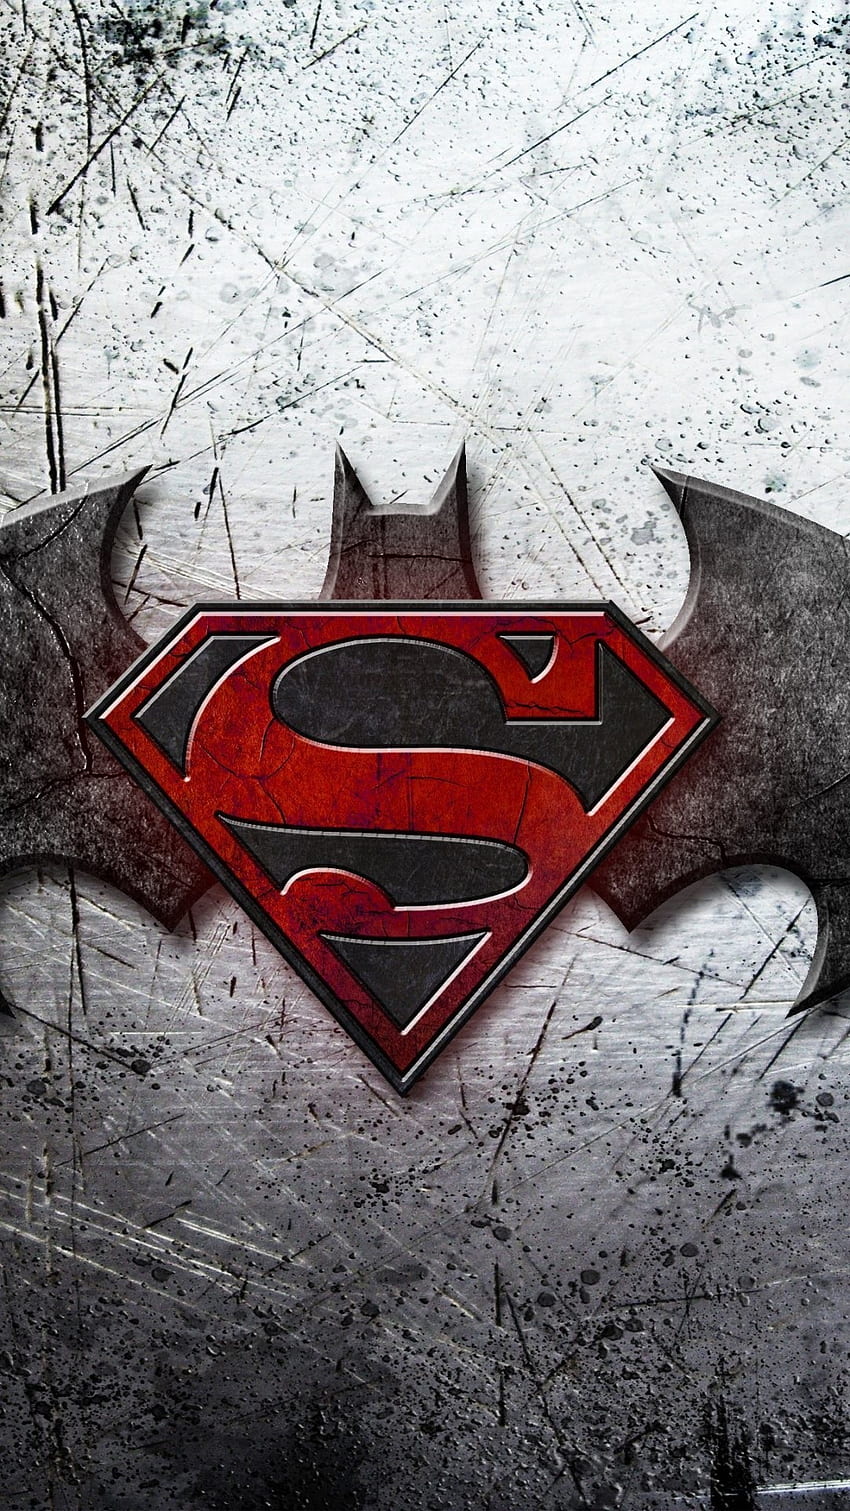 Best Superman HD wallpapers Only for iPhone users  Superman wallpaper  Superman art Superman